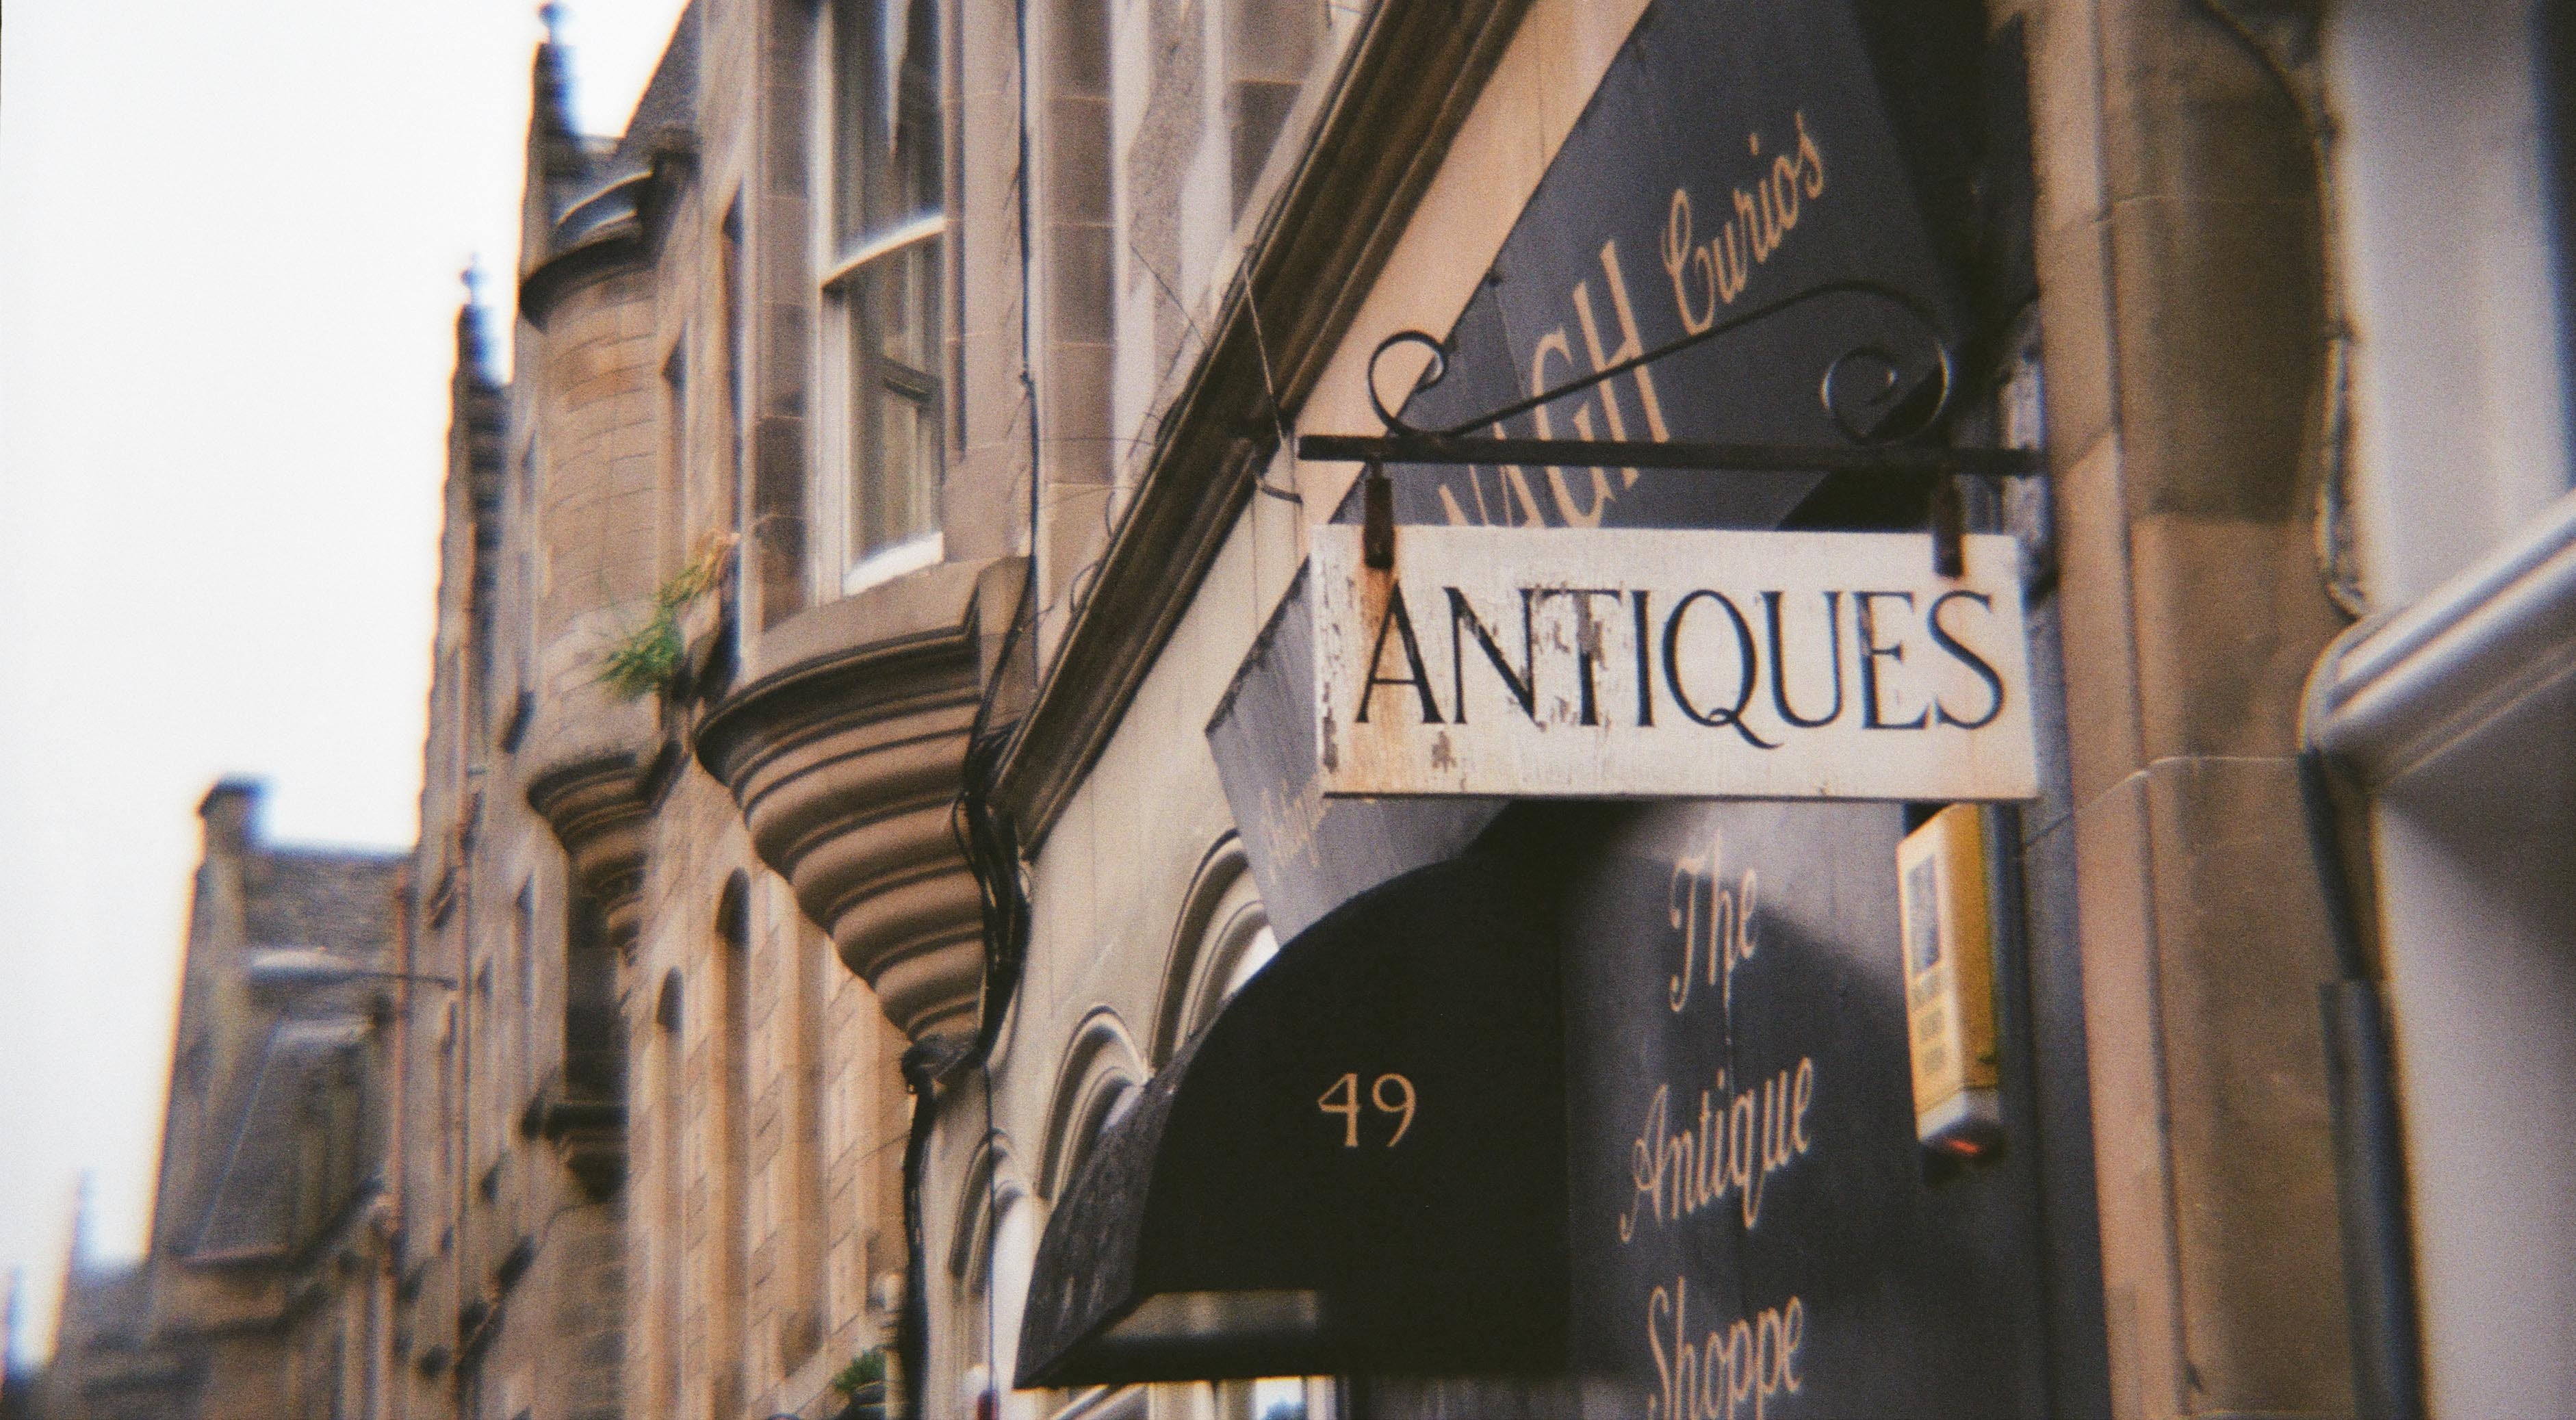 Dolores tricked the thieves by talking about the antiques in her garage. | Photo: Unsplash